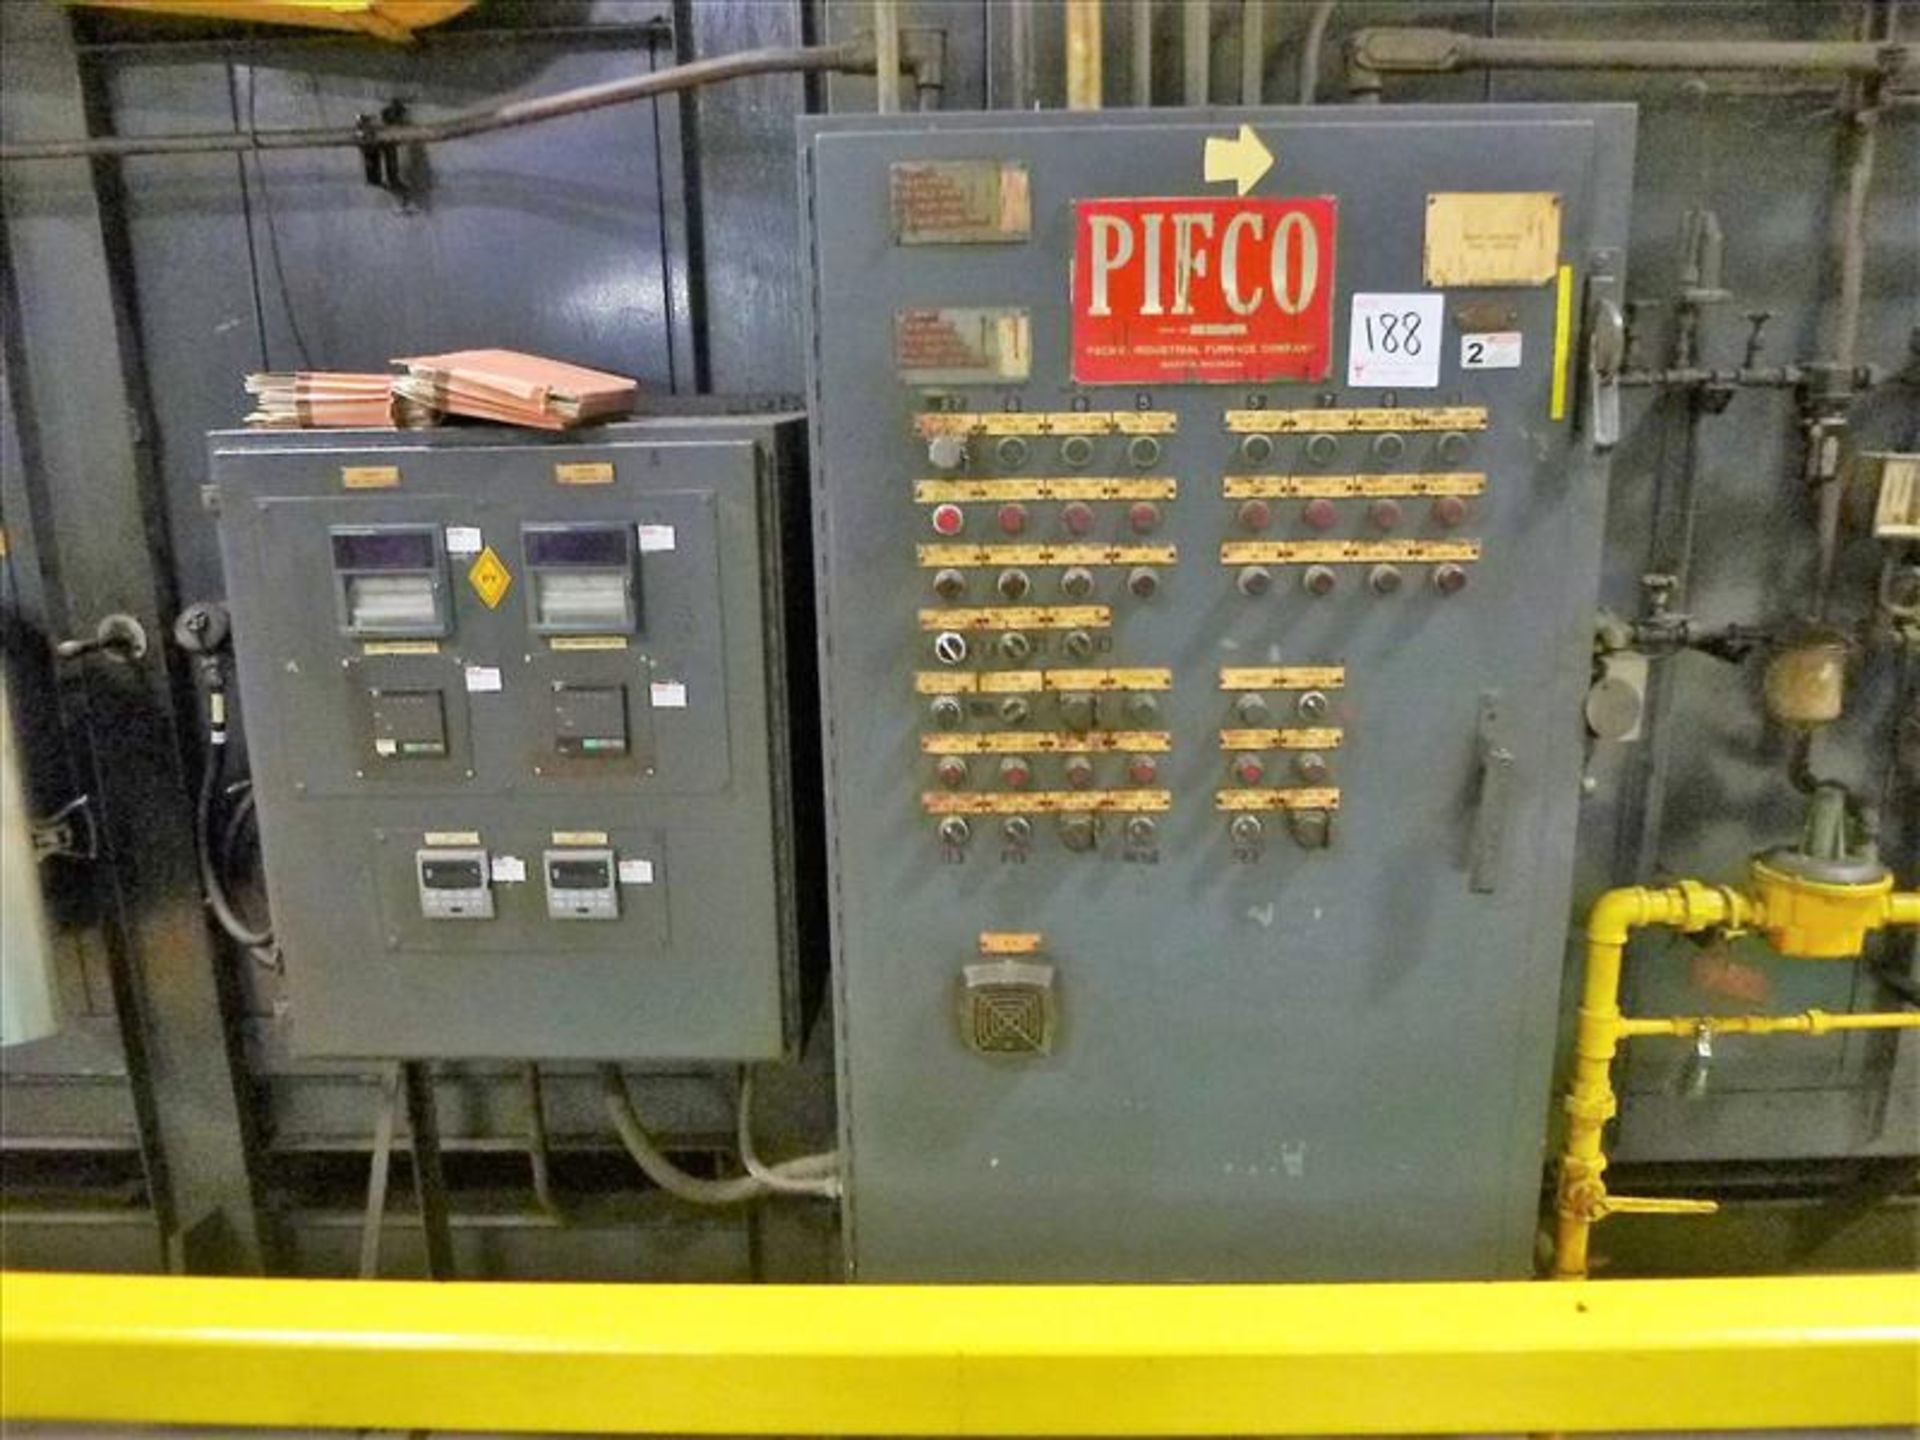 PIFCO SR1987 Gas Fired Stress Relief Oven, s/n 6663, w/ up to 600 Deg. - Image 3 of 5